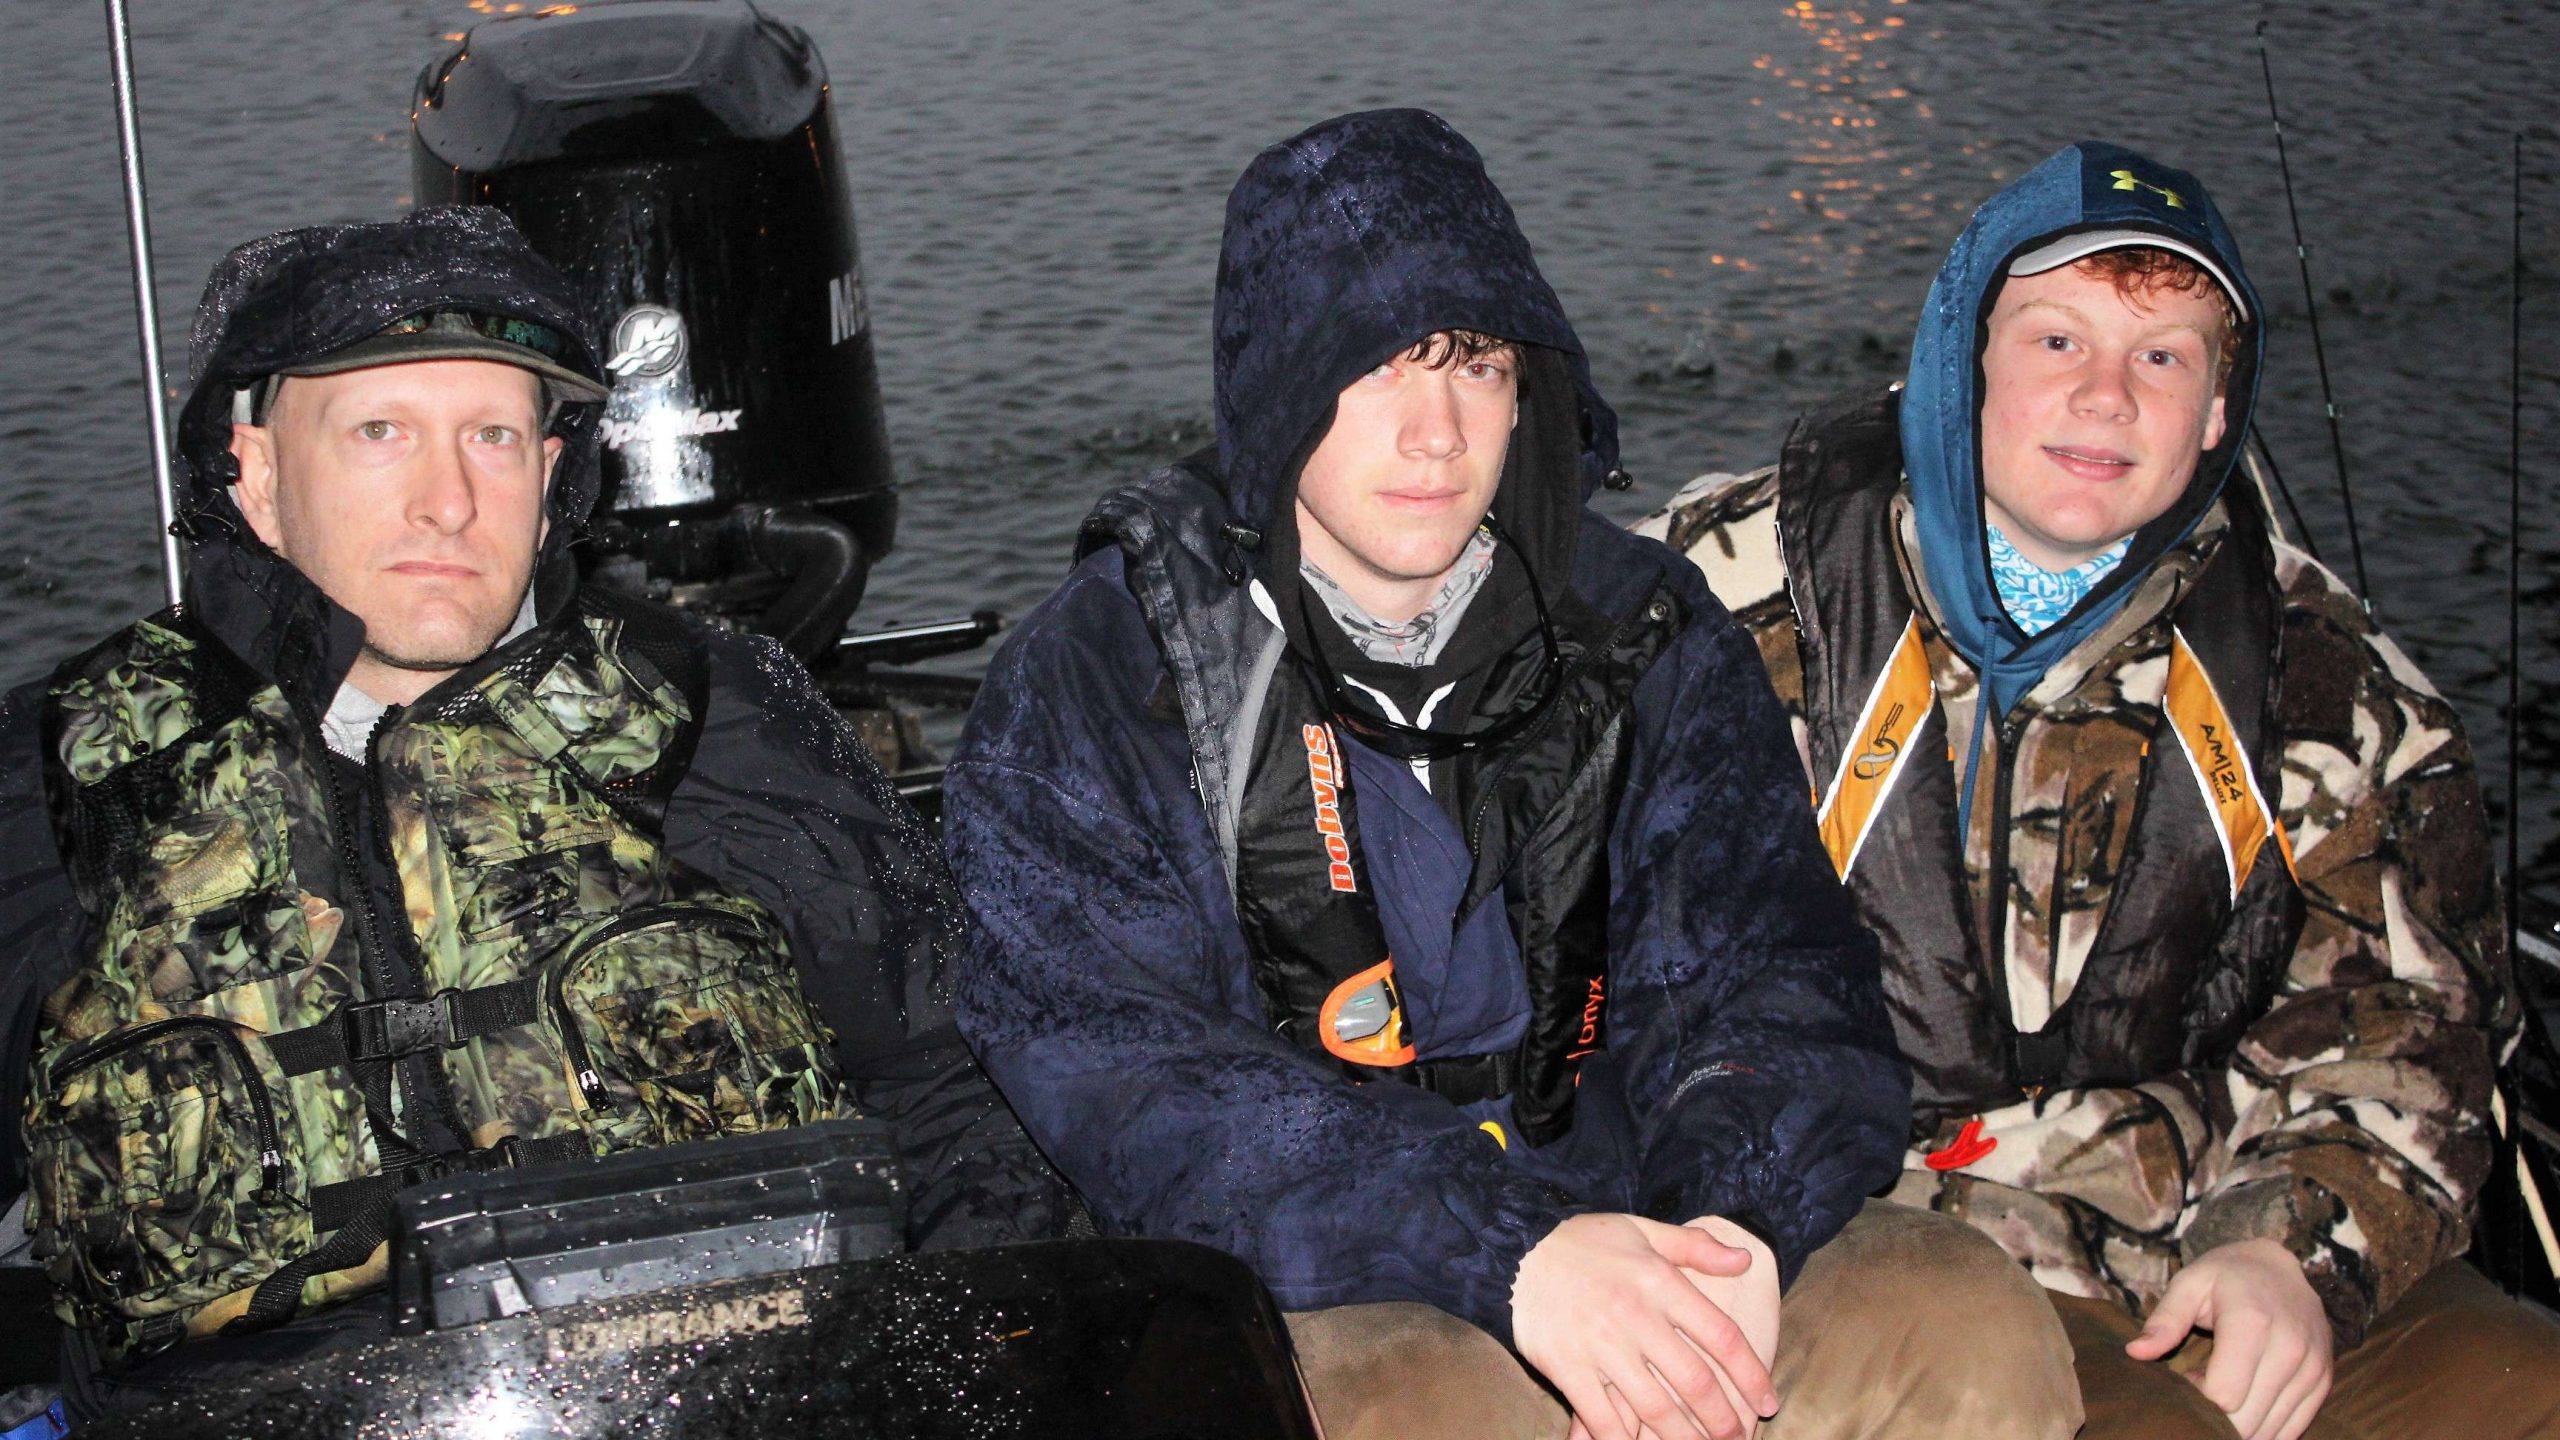 Captain Charles King, and anglers Draven Ray and Austin Shook of Plattsmouth Blue Devil Fishing in Nebraska wait out the rain under cover.